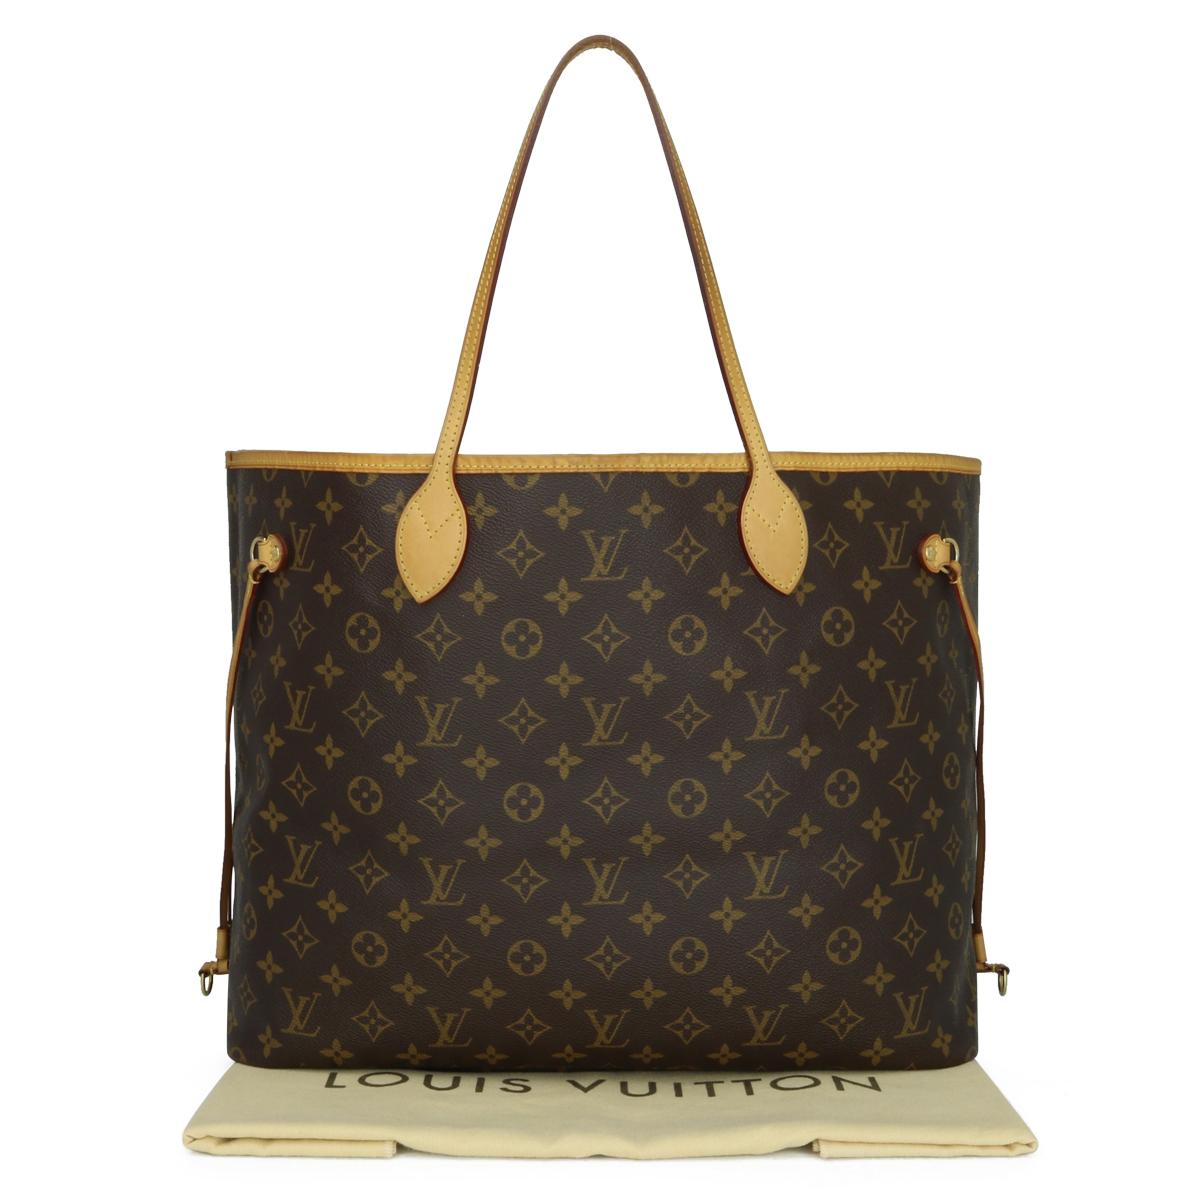 Louis Vuitton Neverfull GM in Monogram with Beige Interior 2007.

This bag is in good condition. 

- Exterior Condition: Good condition. Light storage creases to the canvas. Rubbing to four base corners. General marking, darkening and leather wear